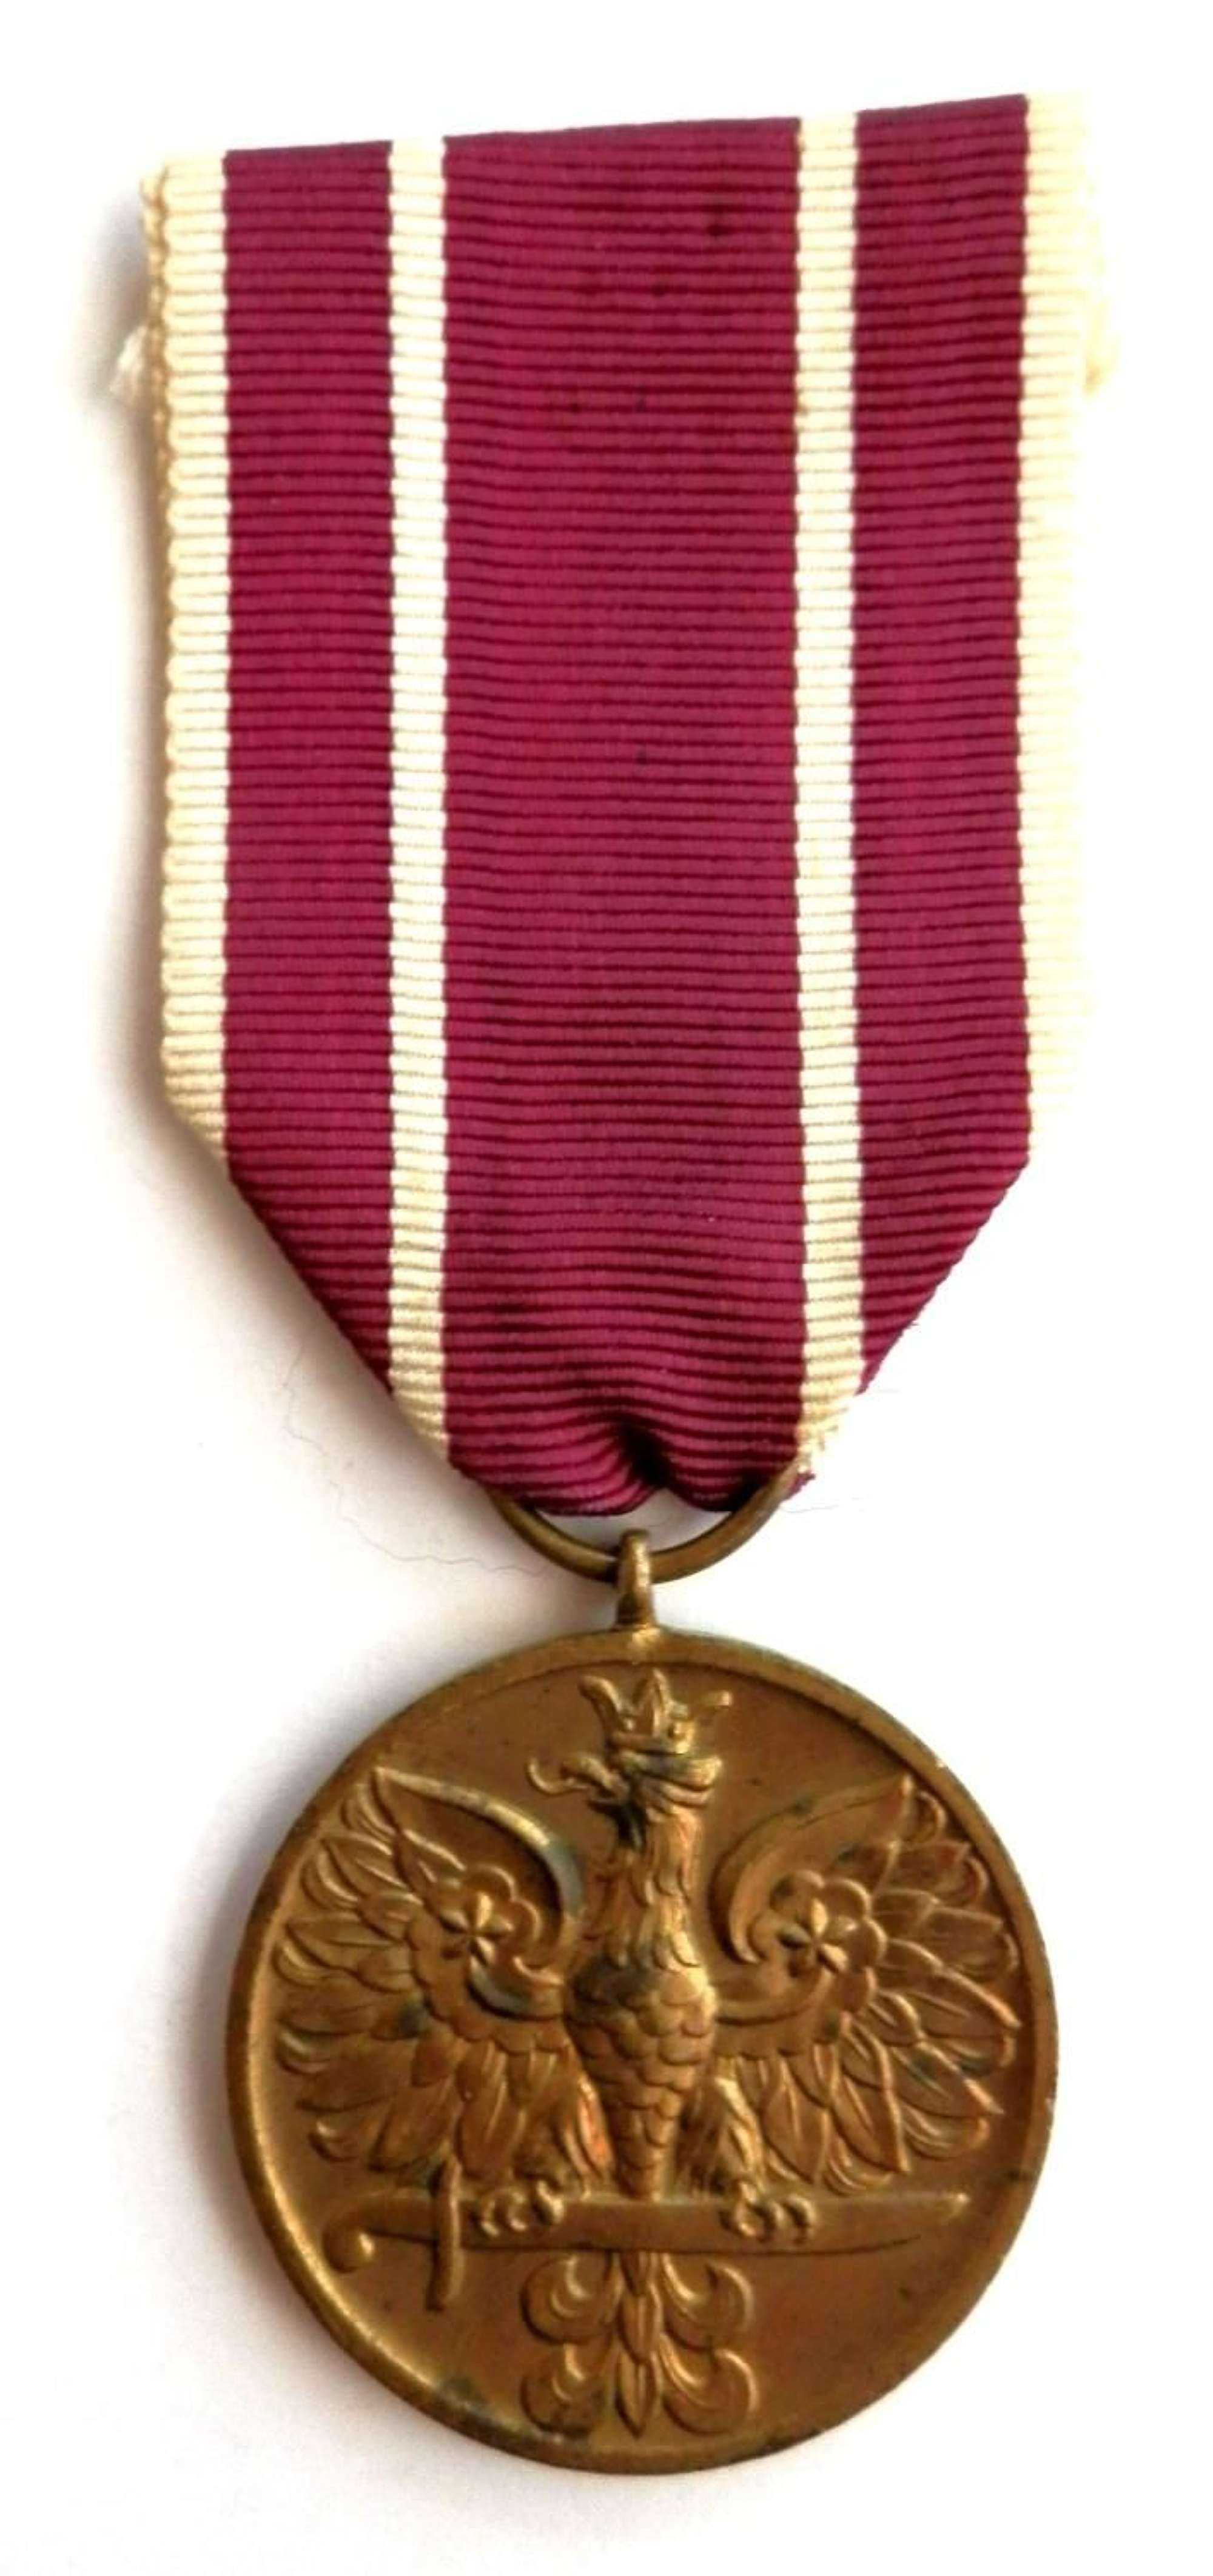 Poland War Medal. WWII issue.